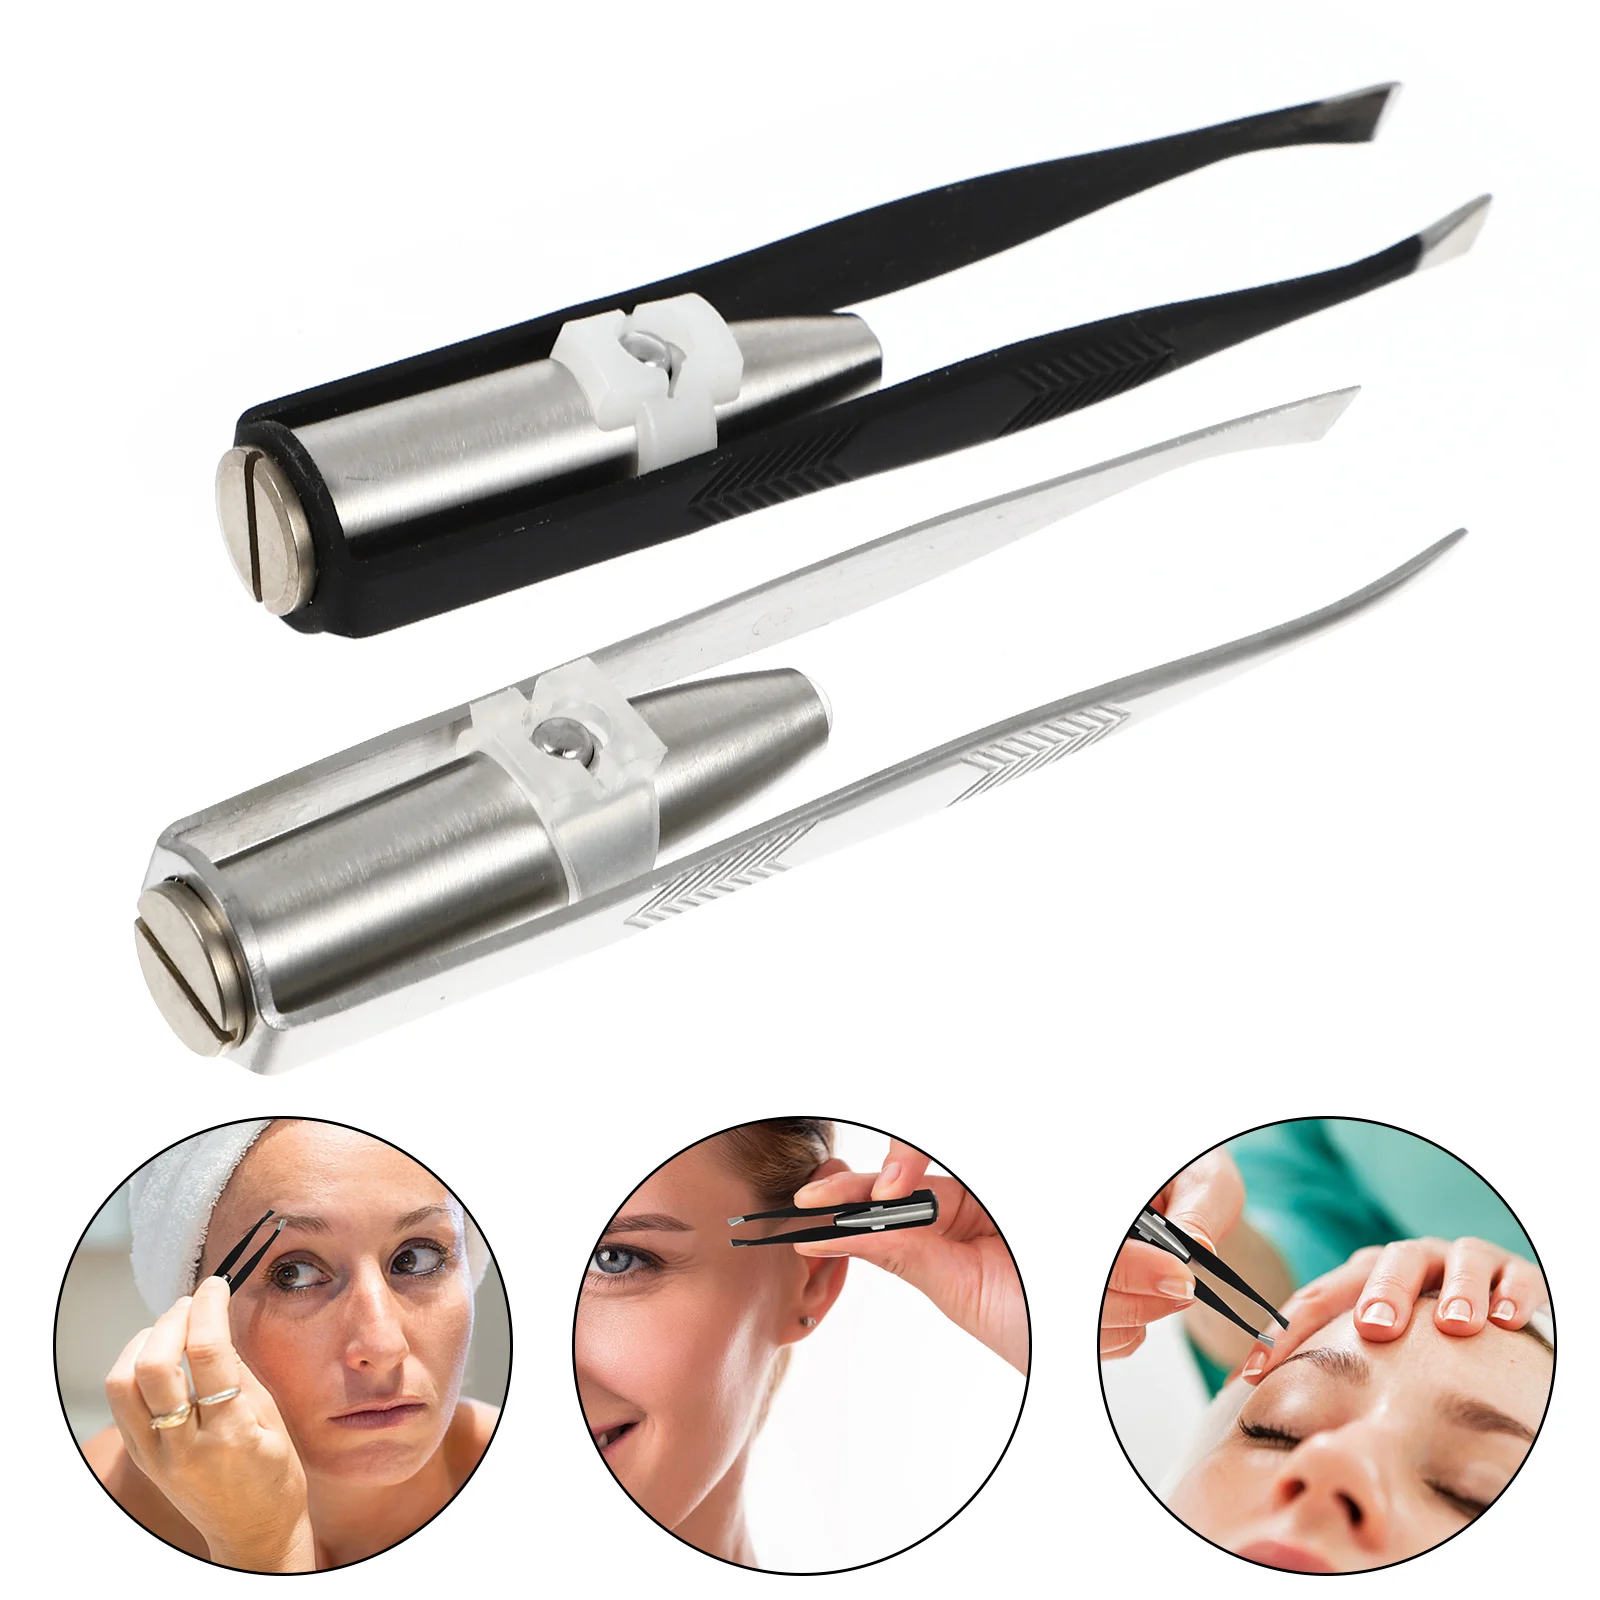 

Eyebrow Hair Light Ingrown Plucker Lighted Remover Pliers Facial Removal Slant Lash Women Brow Precision Professional Trimmer